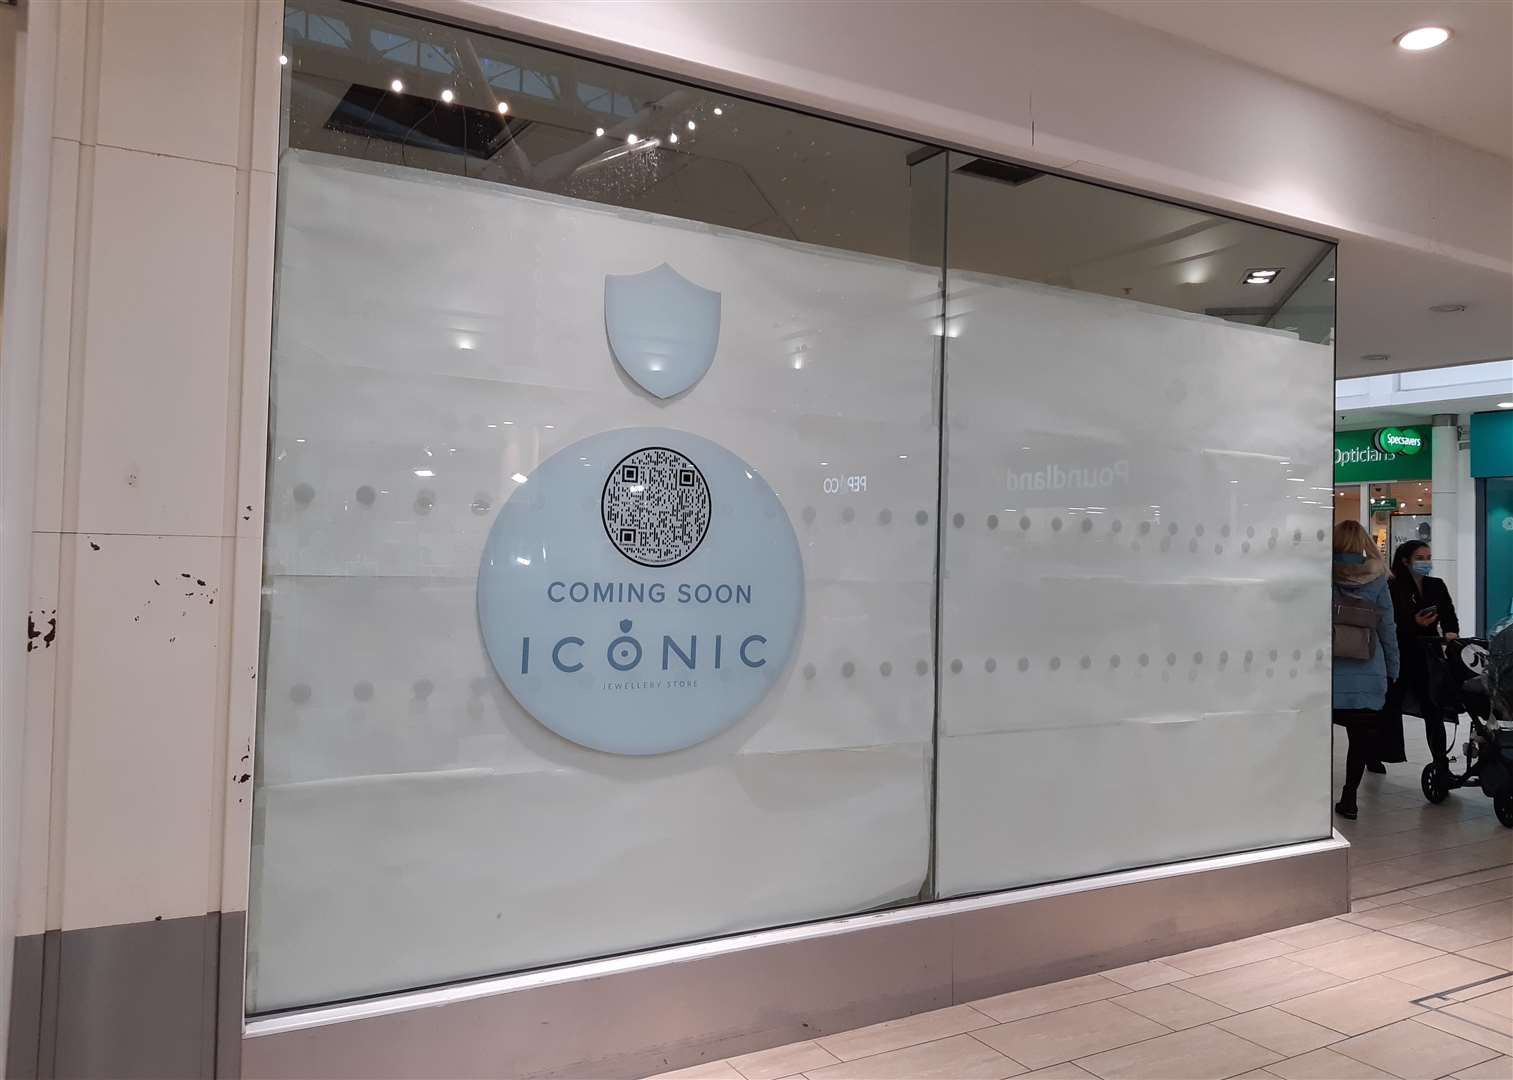 Iconic is taking the former Carphone Warehouse unit